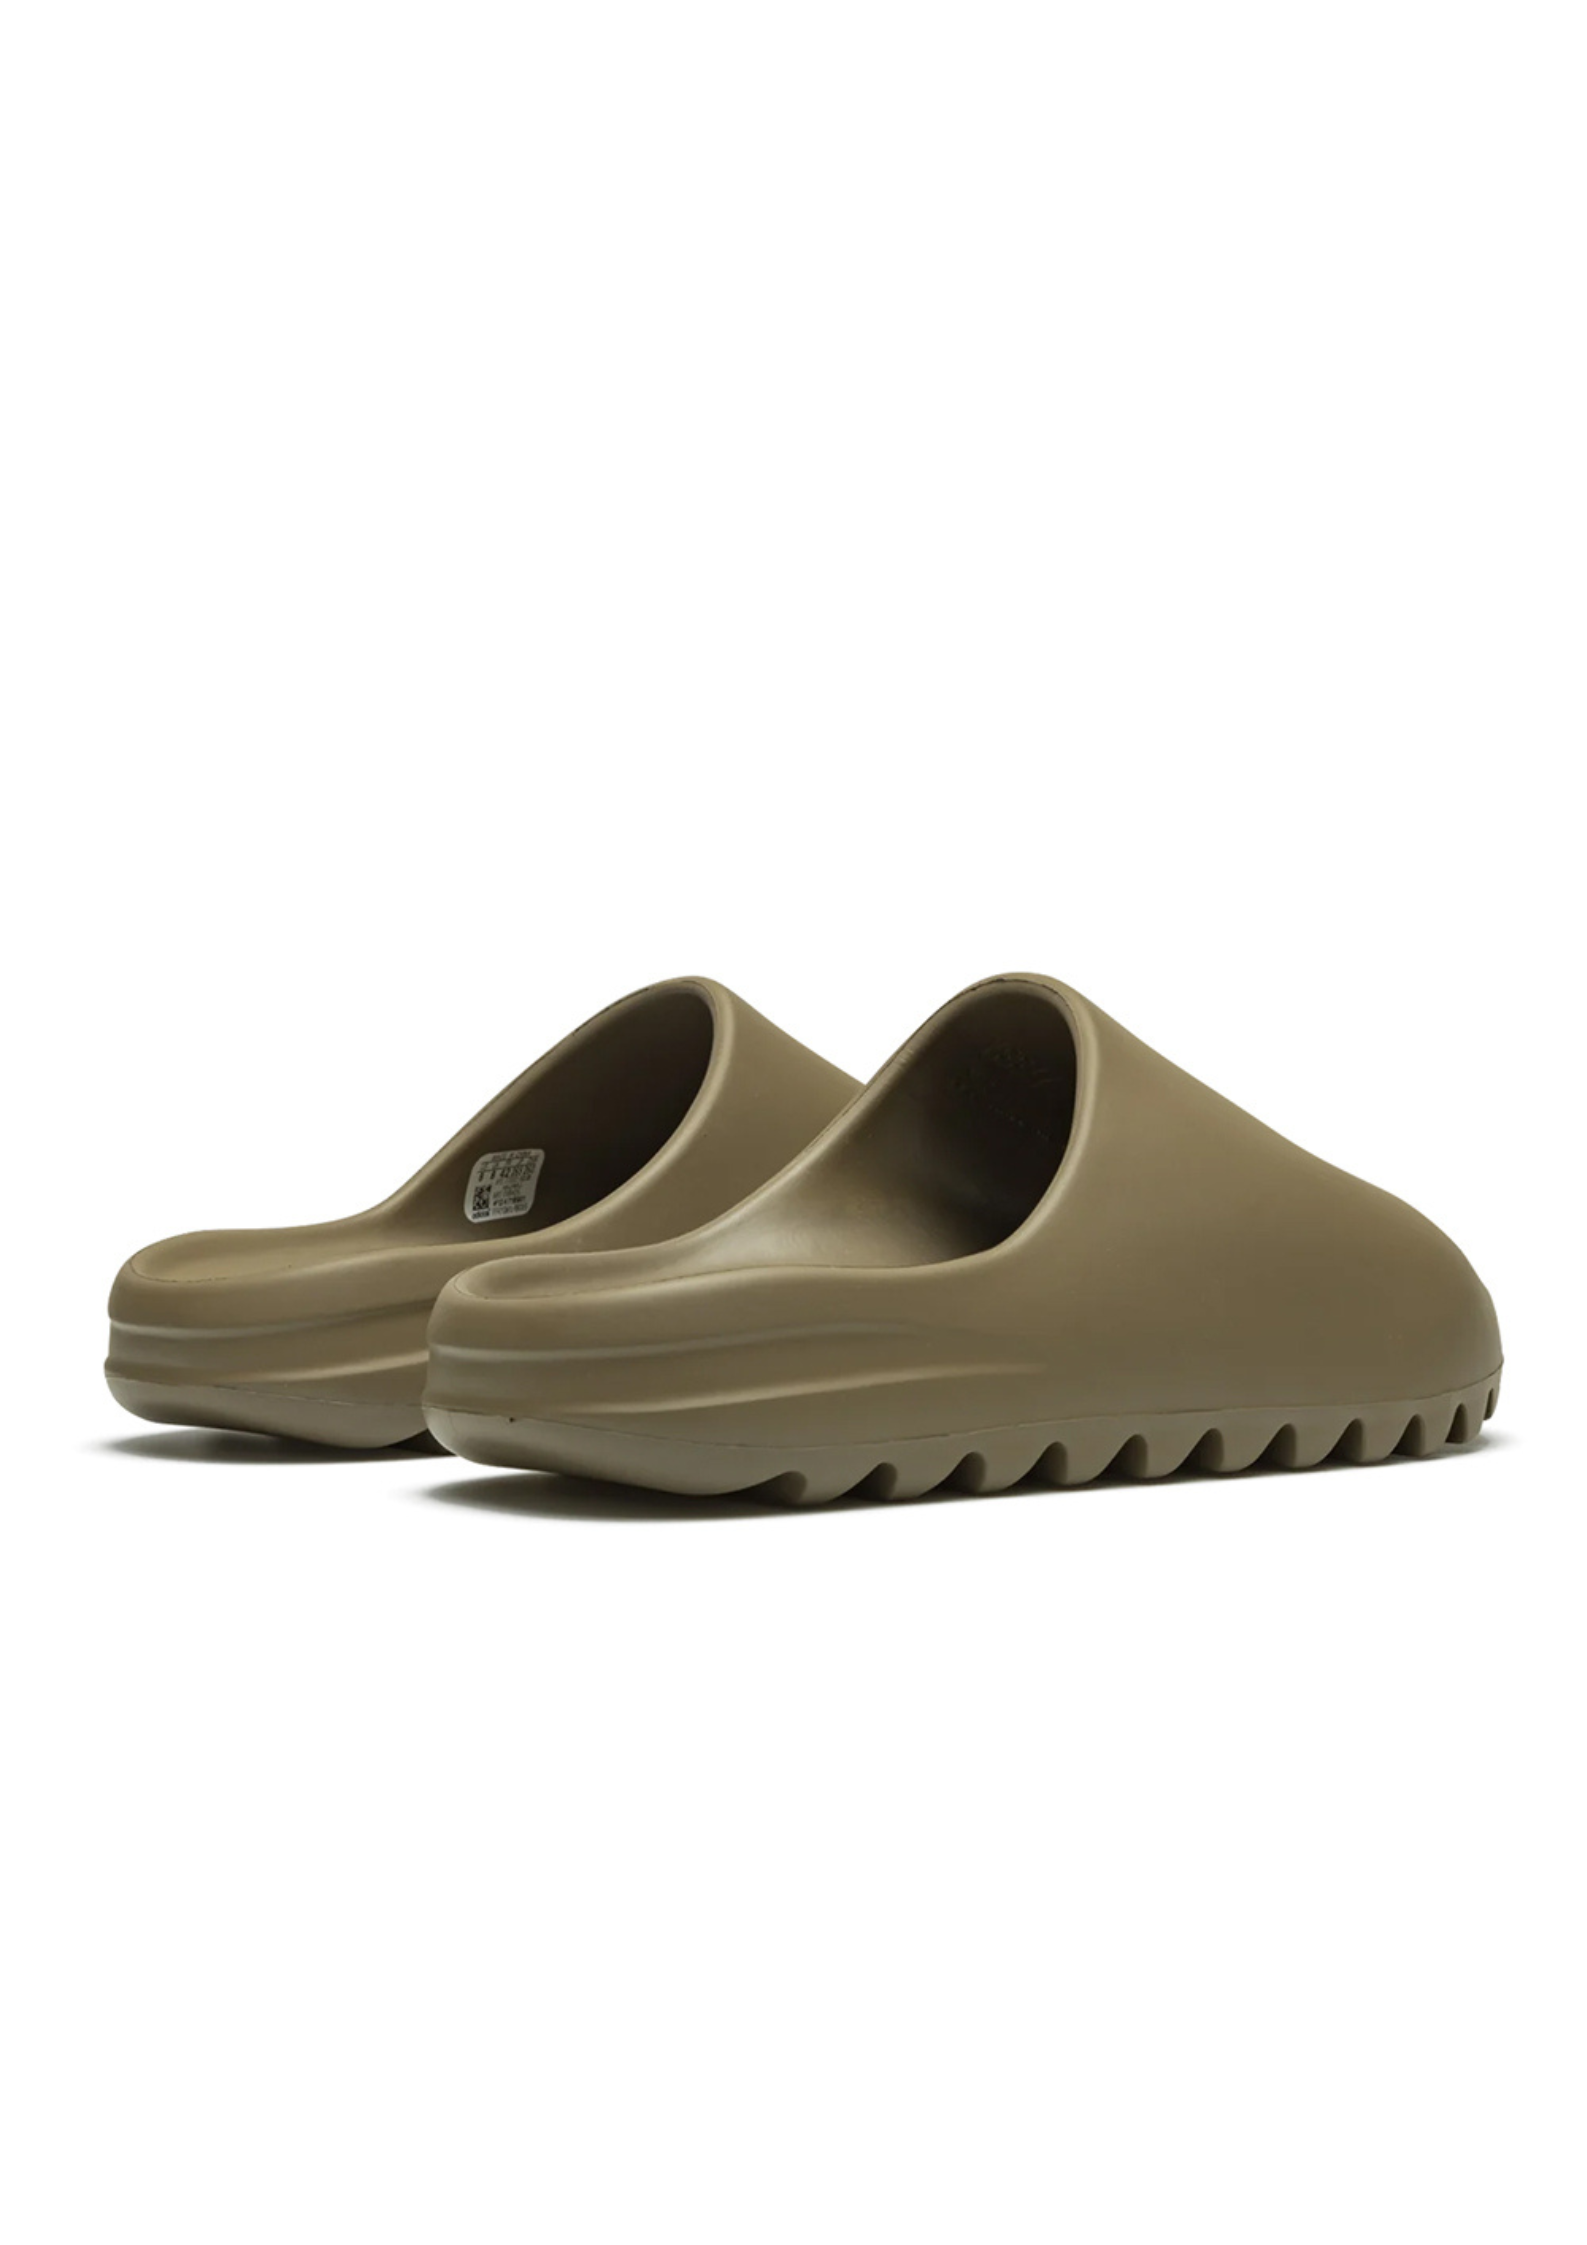 Adidas Yeezy Slides - EARTH BROWN – The Factory KL